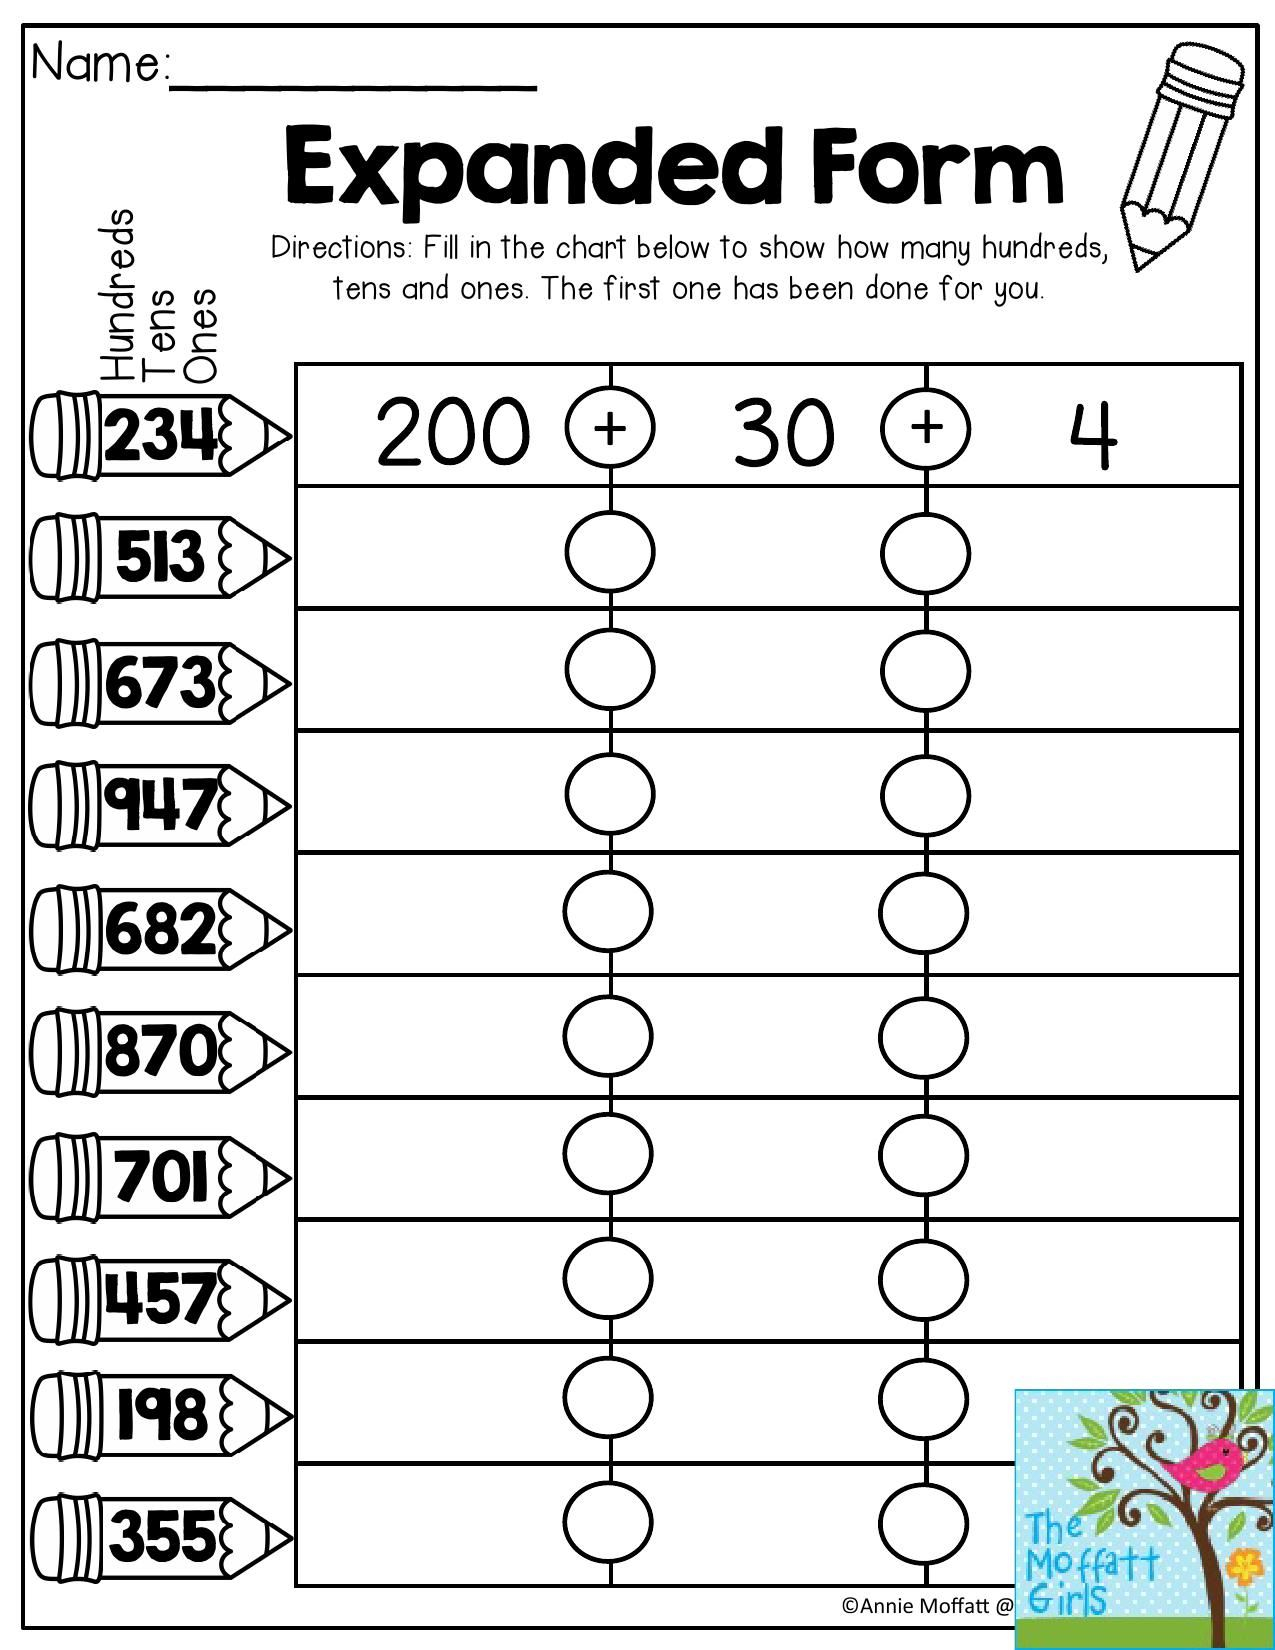 Expanded Form Fill In The Chart To Show How Many Hundreds Tens And 